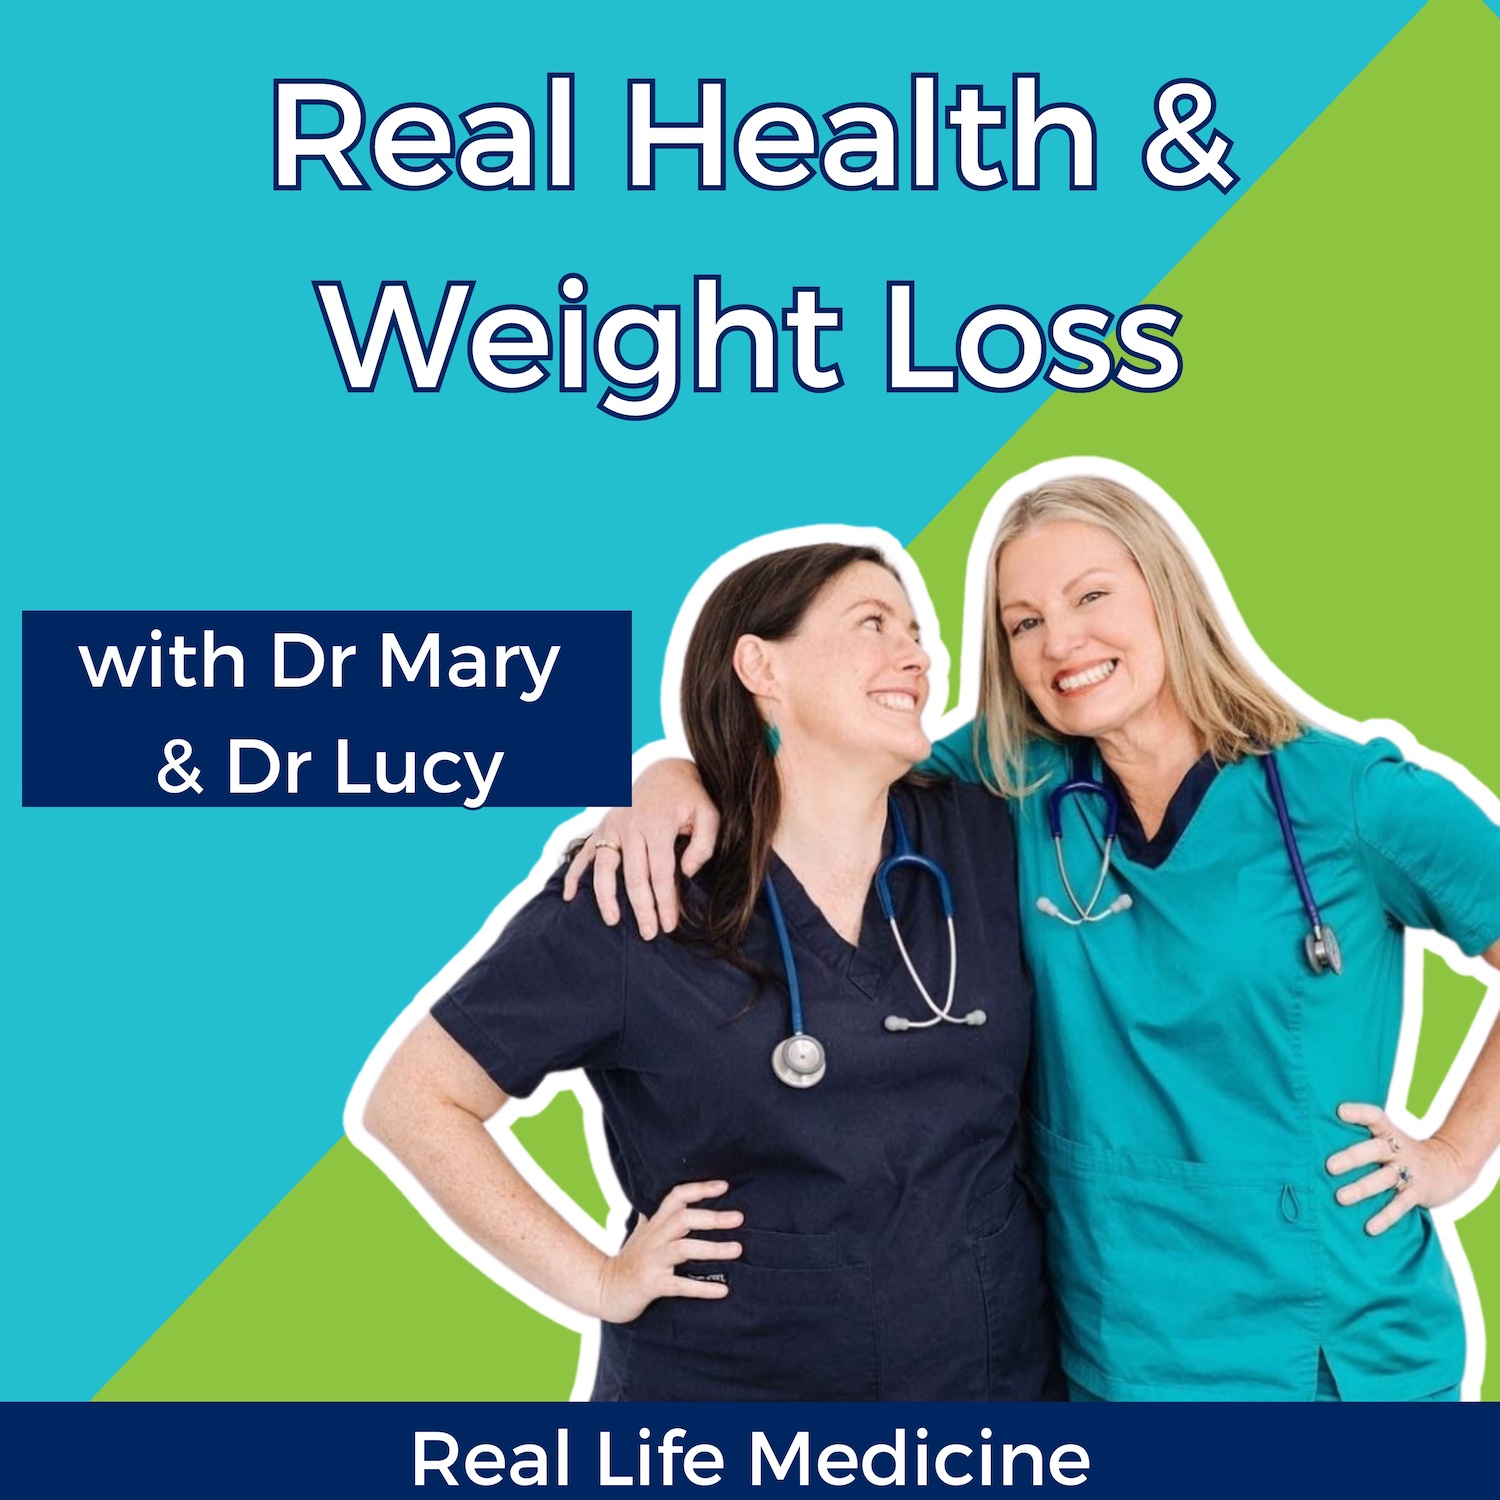 177 Health and weight loss made easy and fun